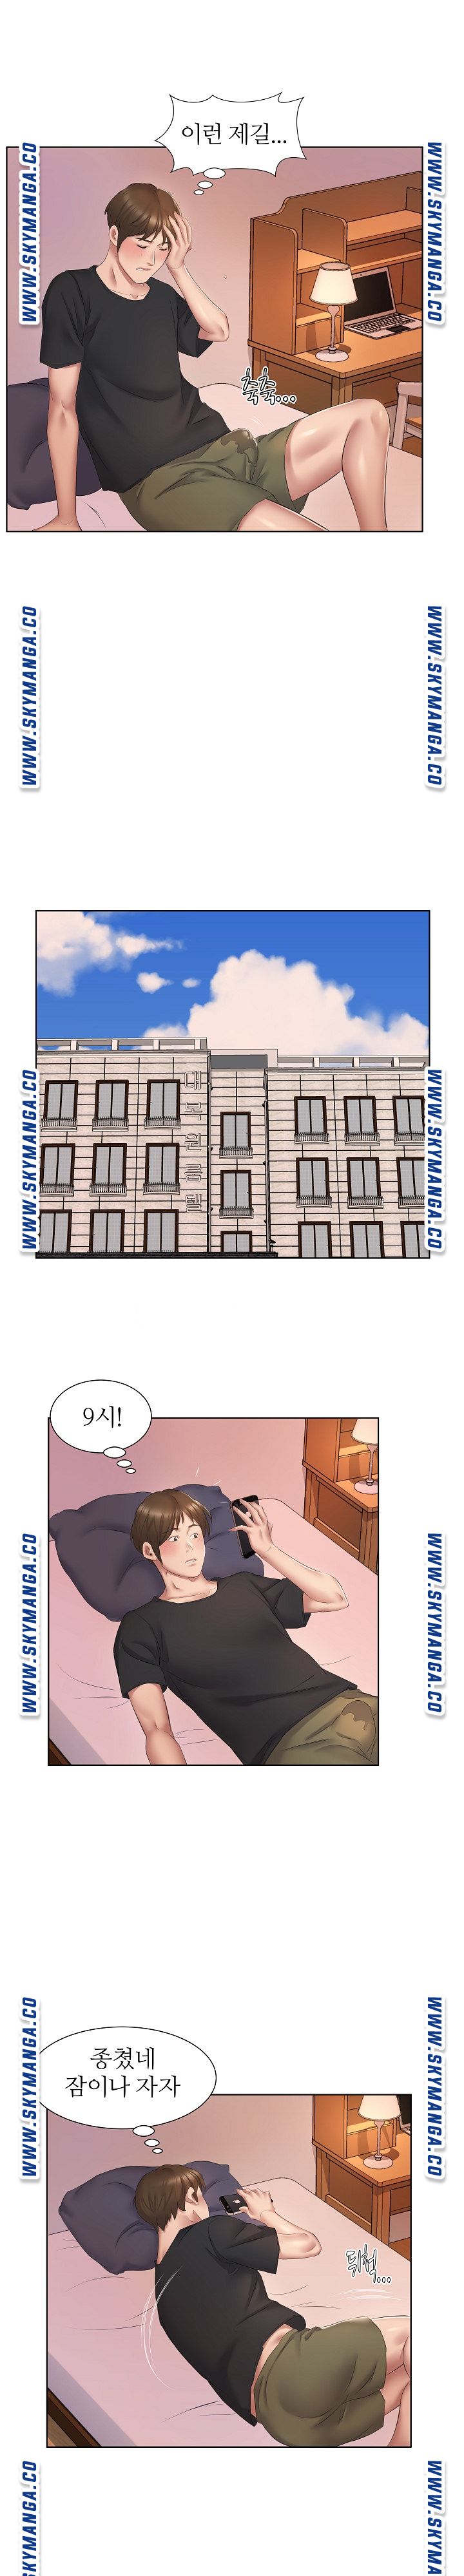 One Room Hotel Raw - Chapter 3 Page 15